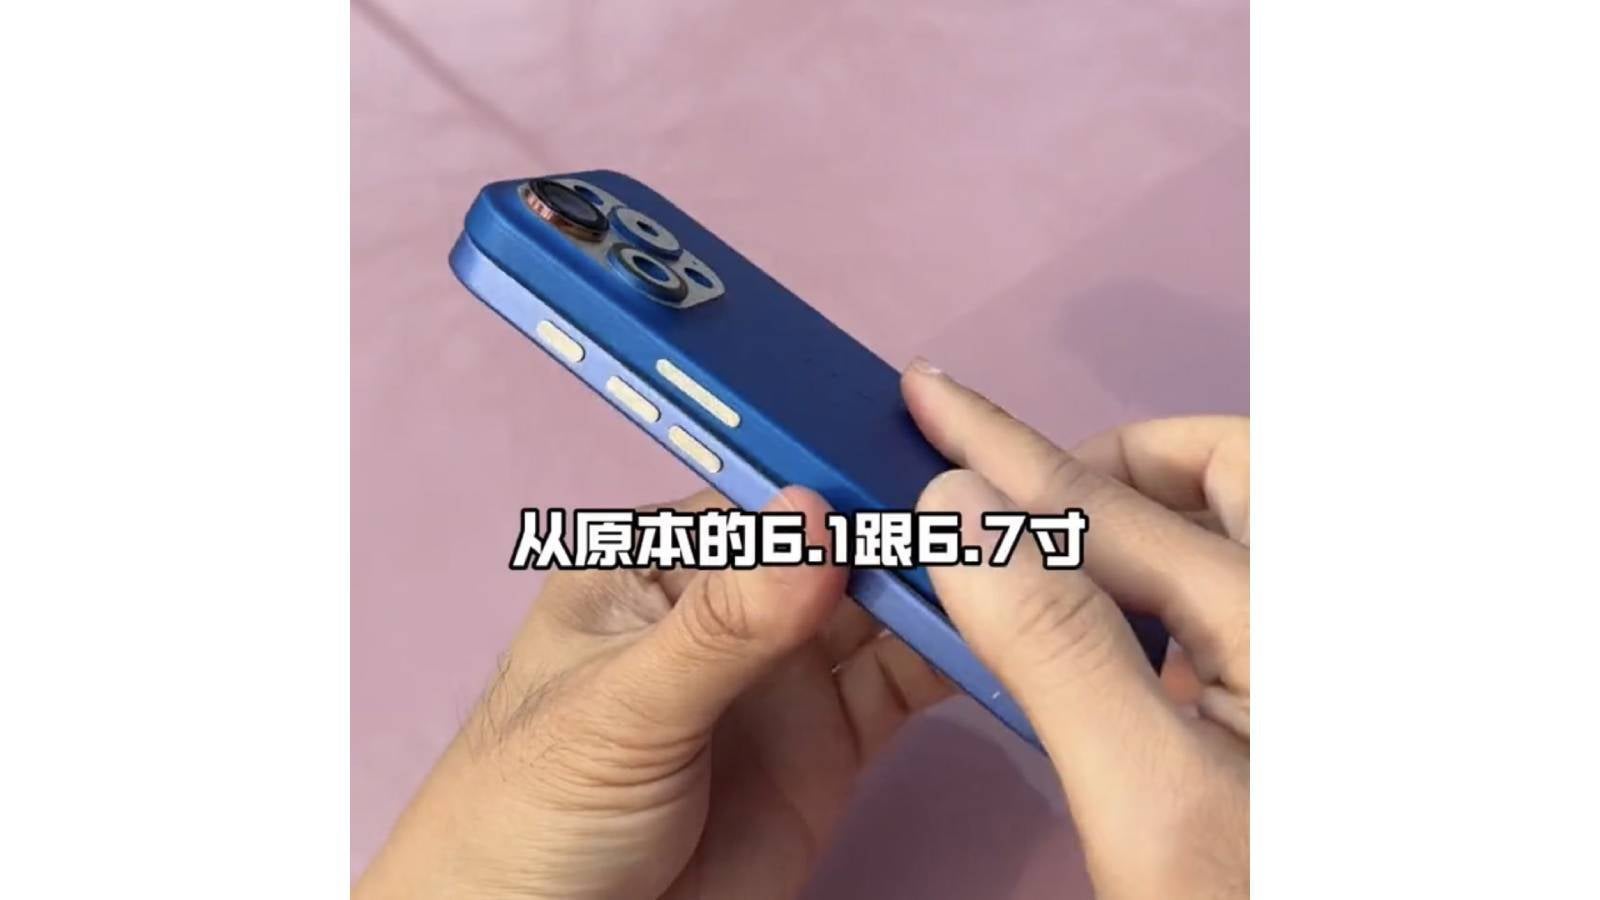 The iPhone 16 Pro's customizable Action button might be a little bigger - Few iPhone 16 surprises left as images of dummy units, case, and new color variants leaked